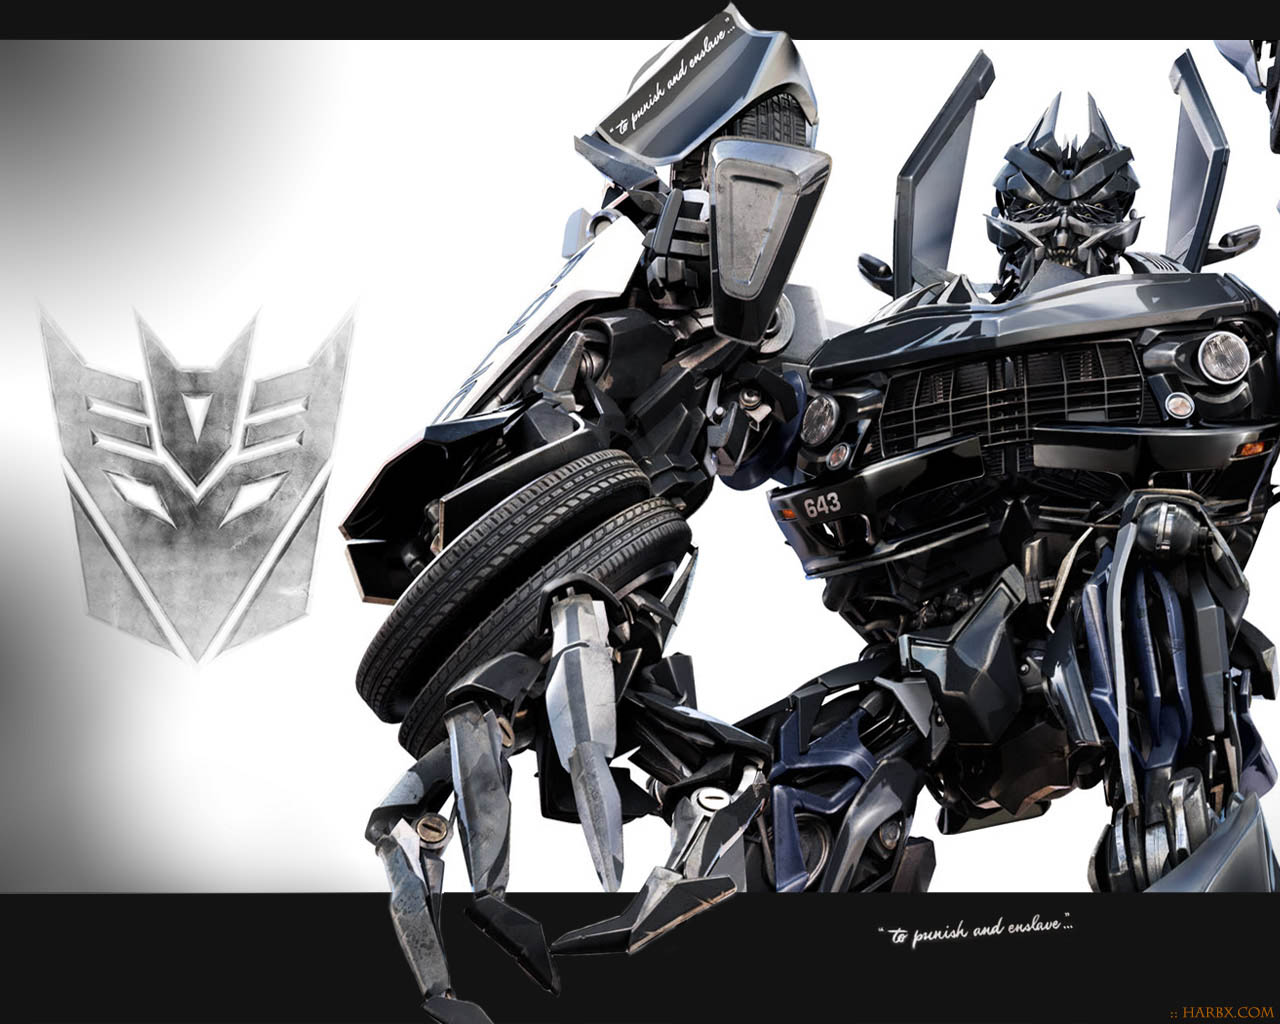 Powerful Transformers Image For Your Desktop